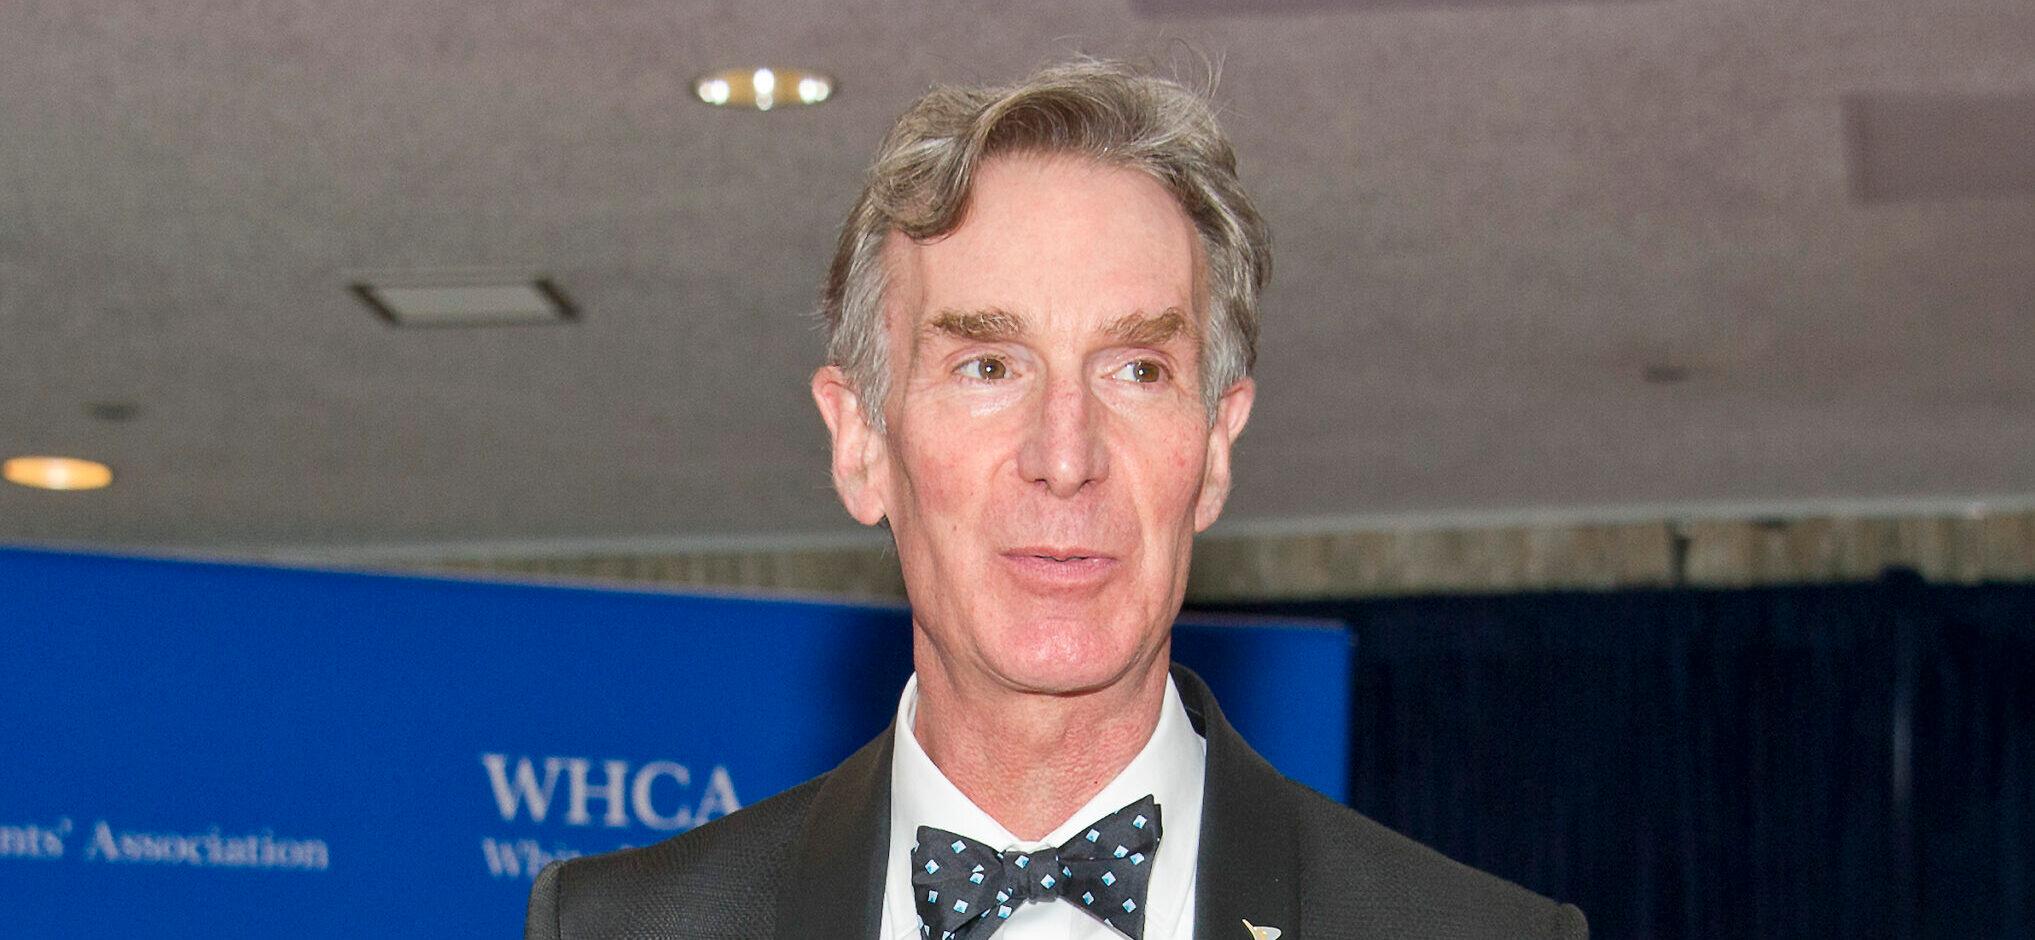 Bill Nye The Science Guy Makes His 66th Trip Around The Sun!!